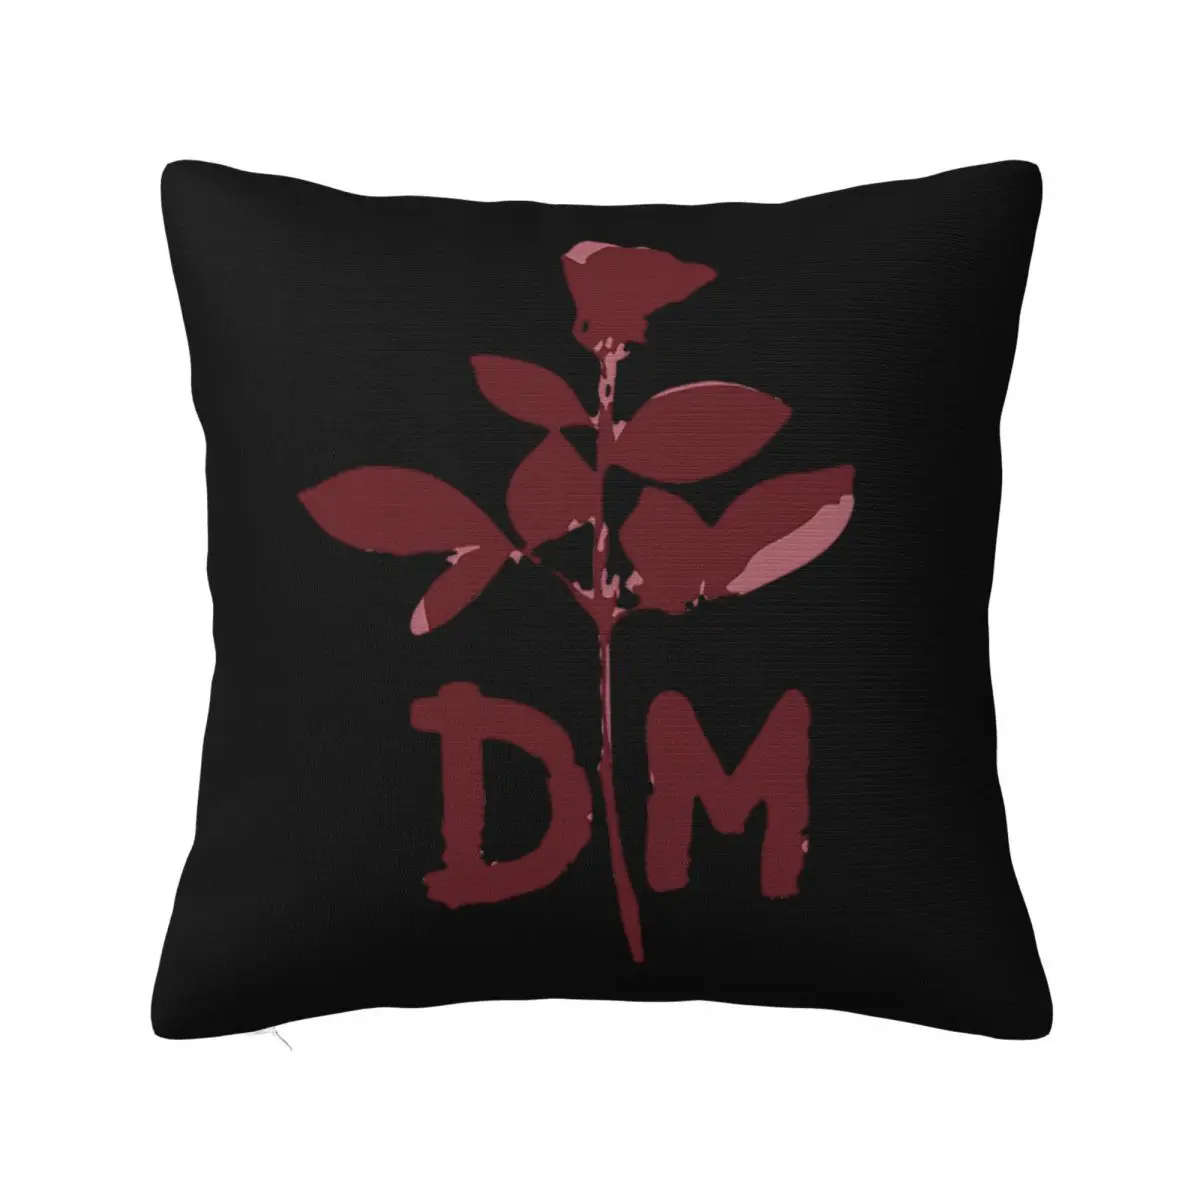 

Devotee Rose DM Depeche Cool Mode Pillowcase Printing Polyester Cushion Cover Gift Throw Pillow Case Cover Seater Square 45X45cm